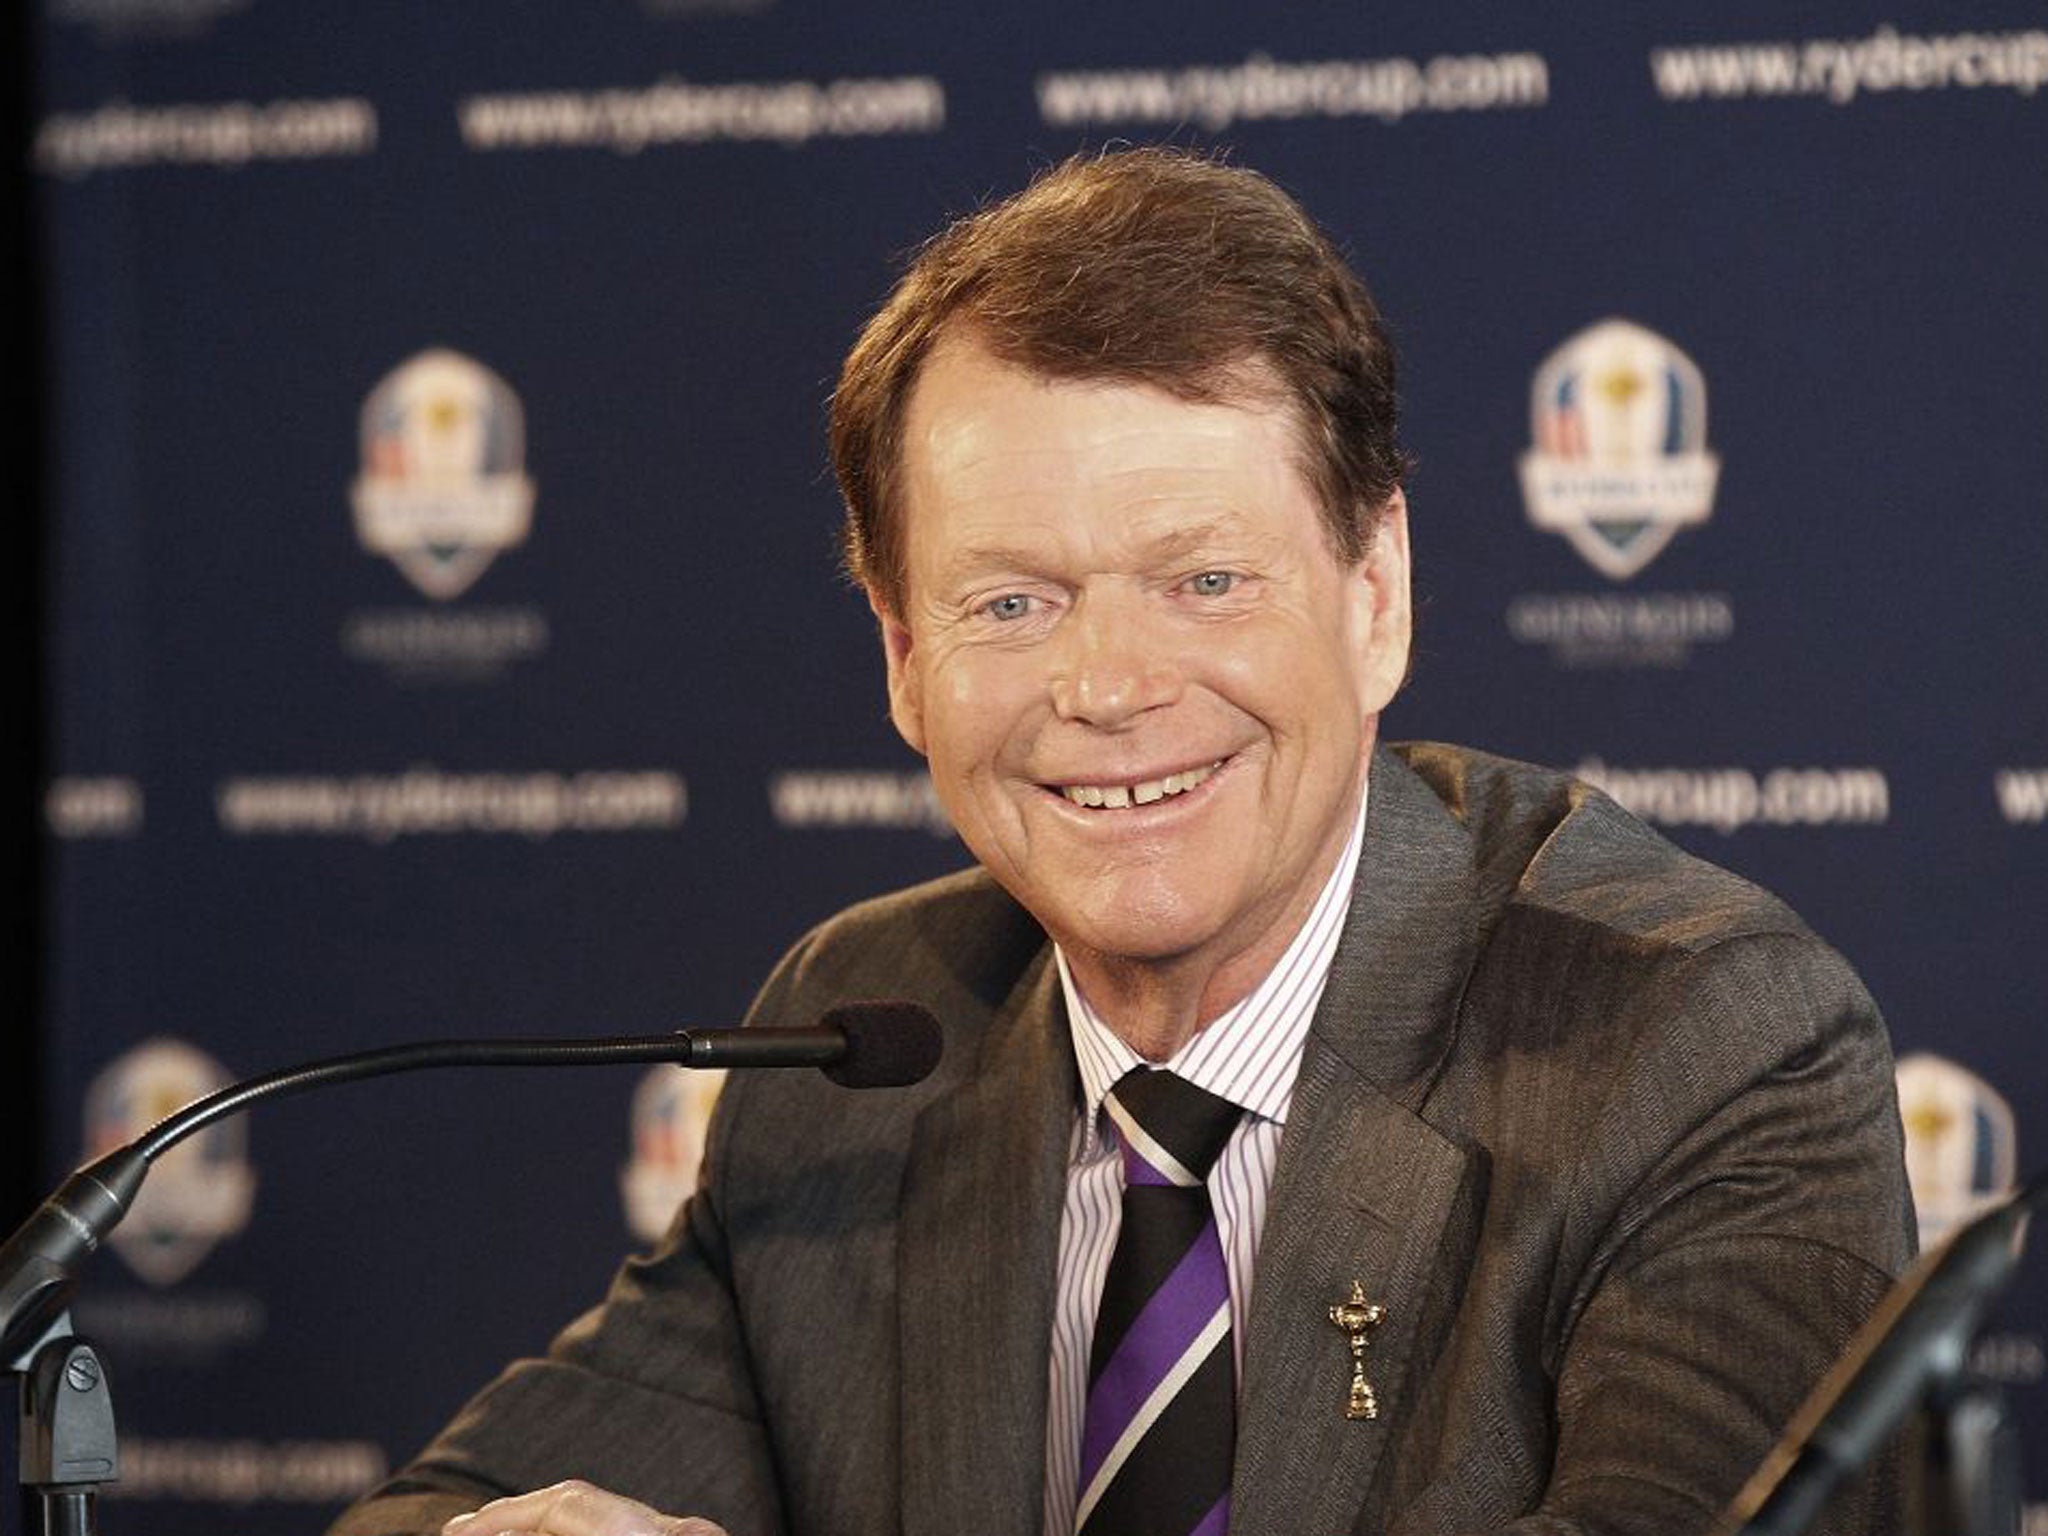 Tom Watson believes more US players should qualify on merit